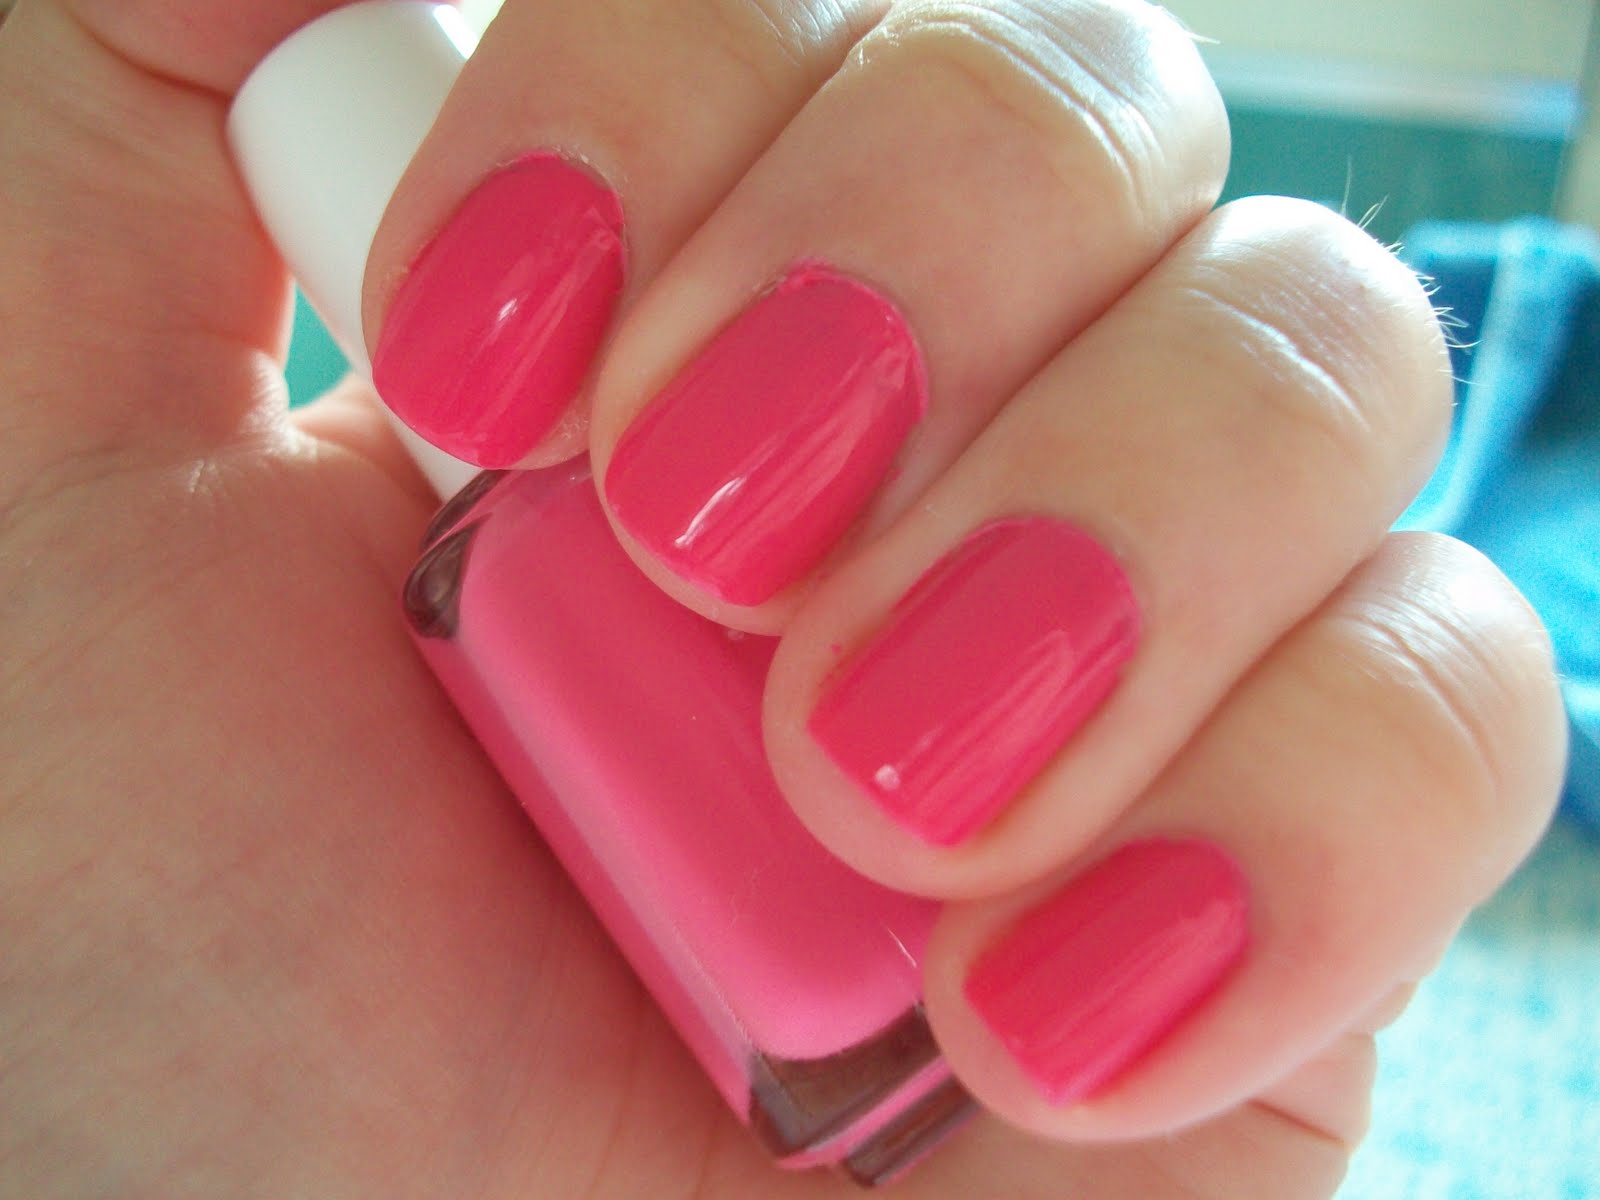 7. "The Most Beautiful Nail Polish Colors for Spring" - wide 1